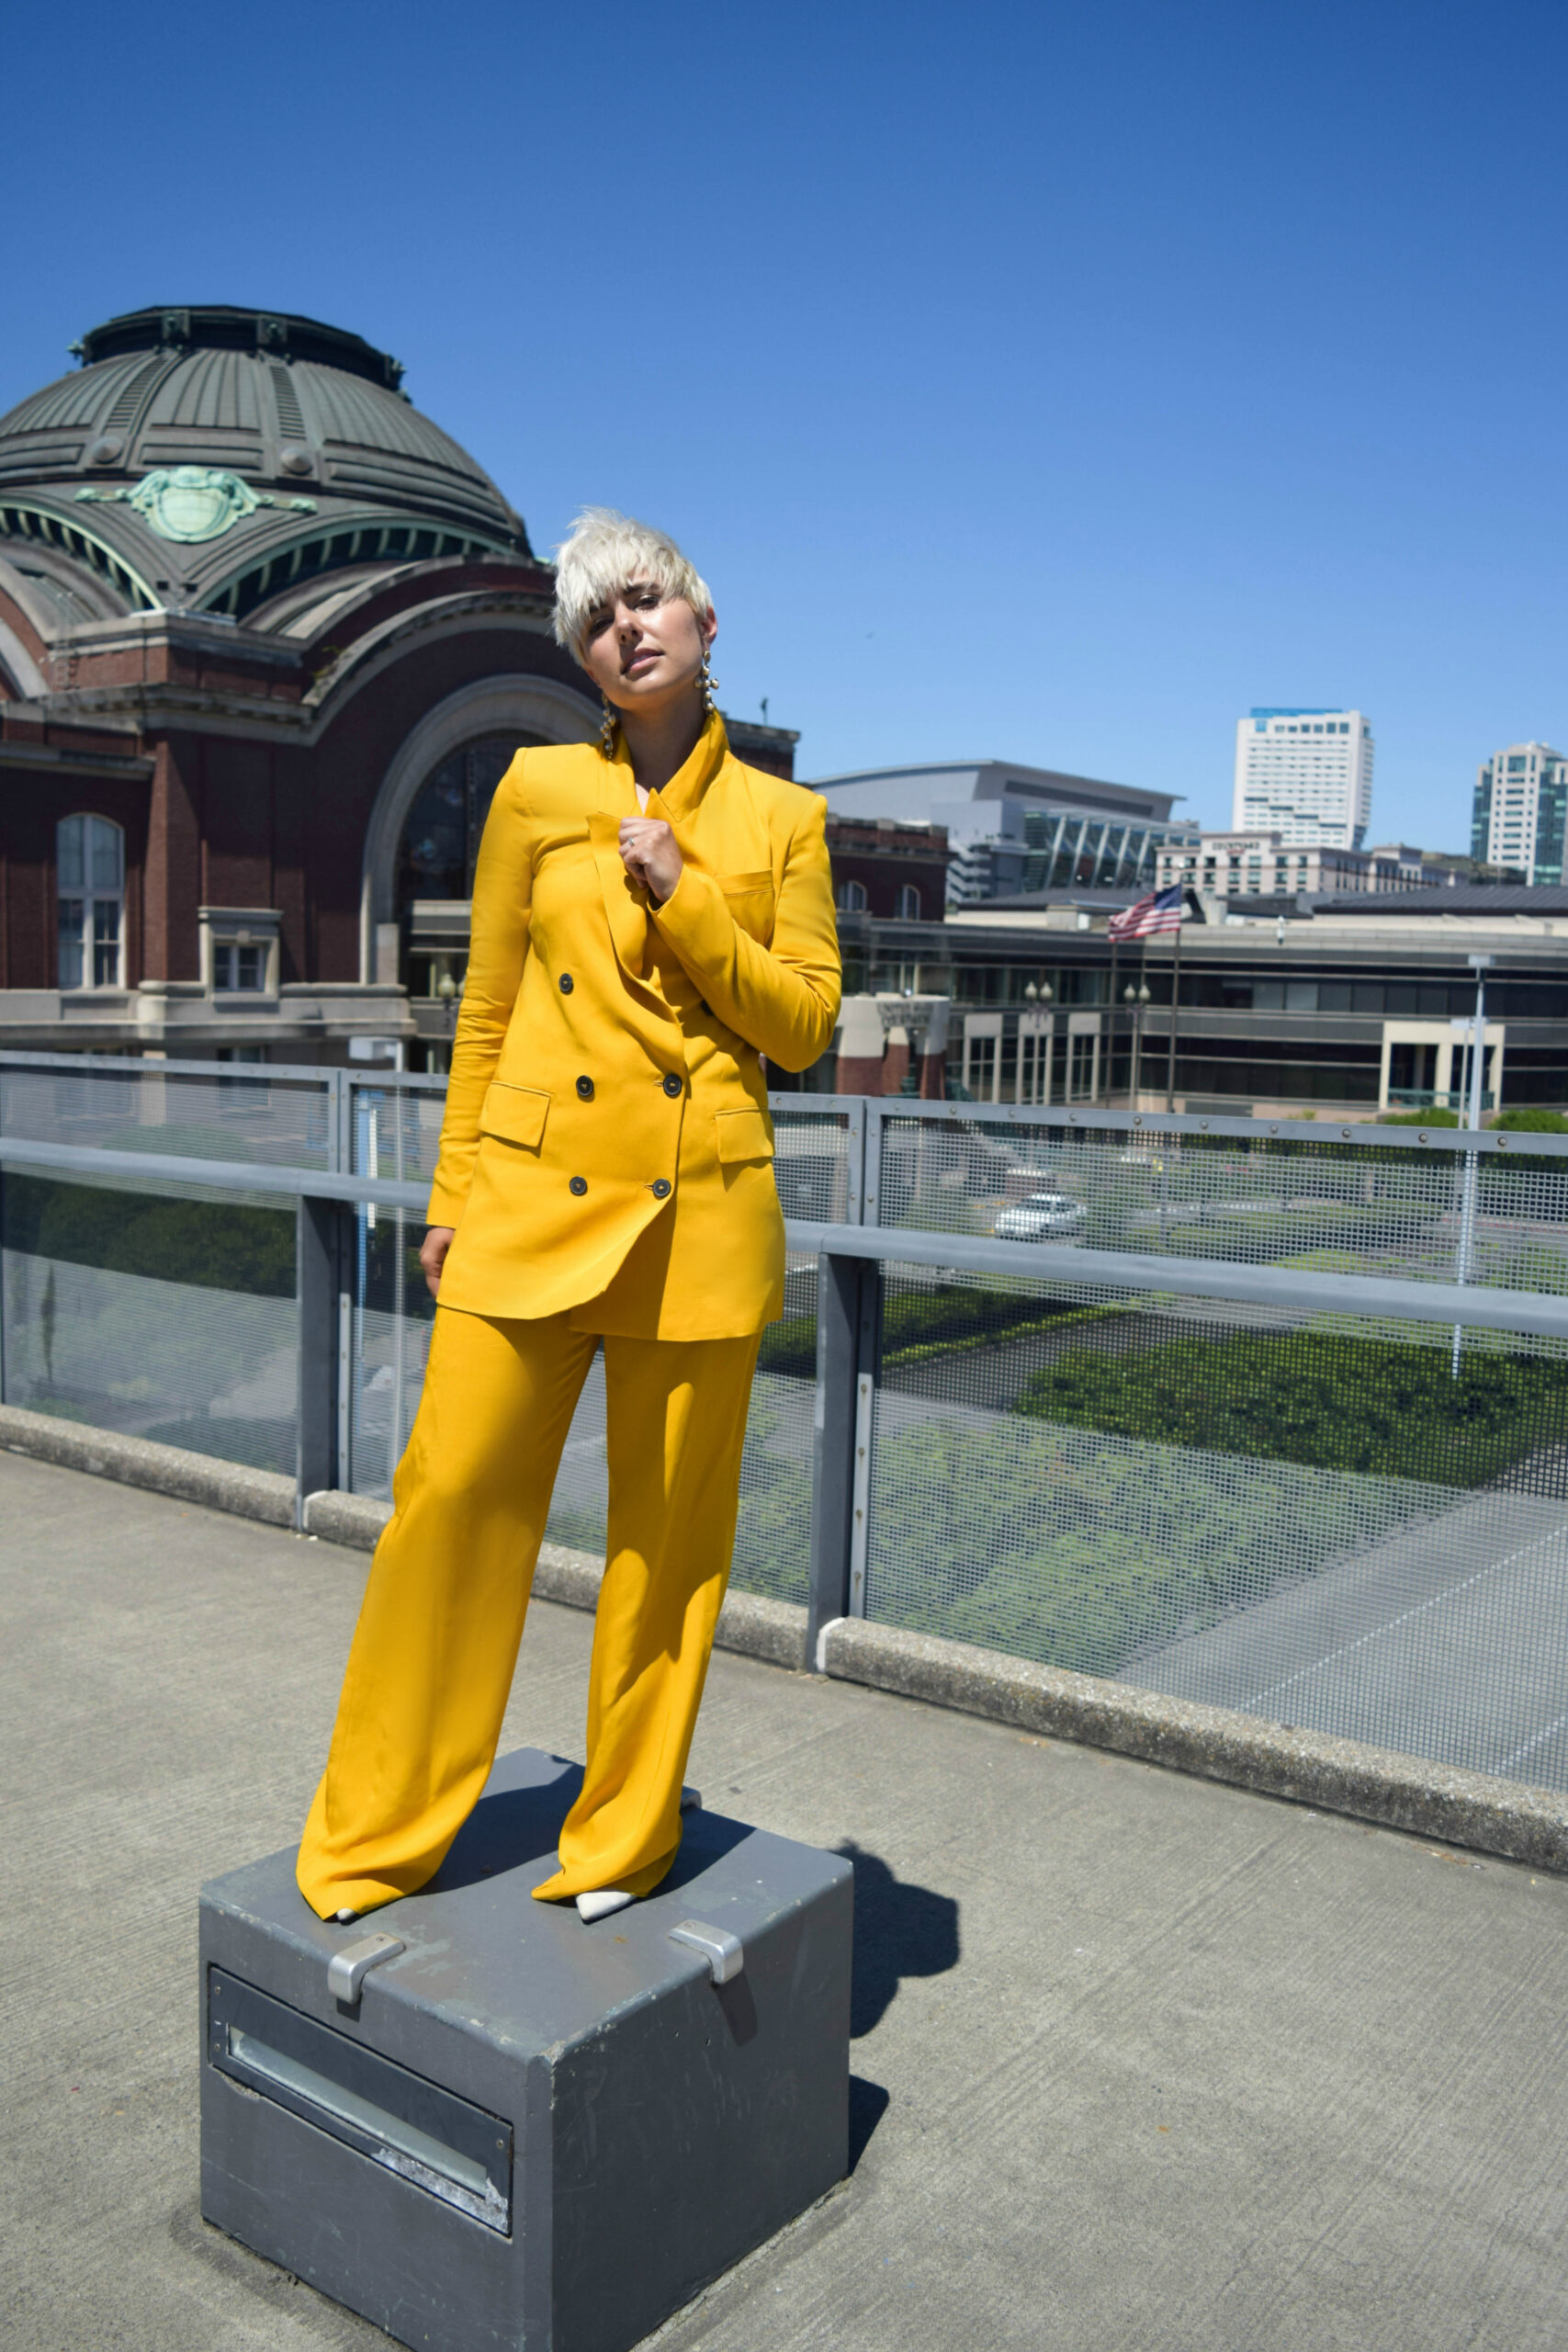 Fashion Blogger BloggerNotBillionaire Wears Fall's Hottest Trend, the Full Suit